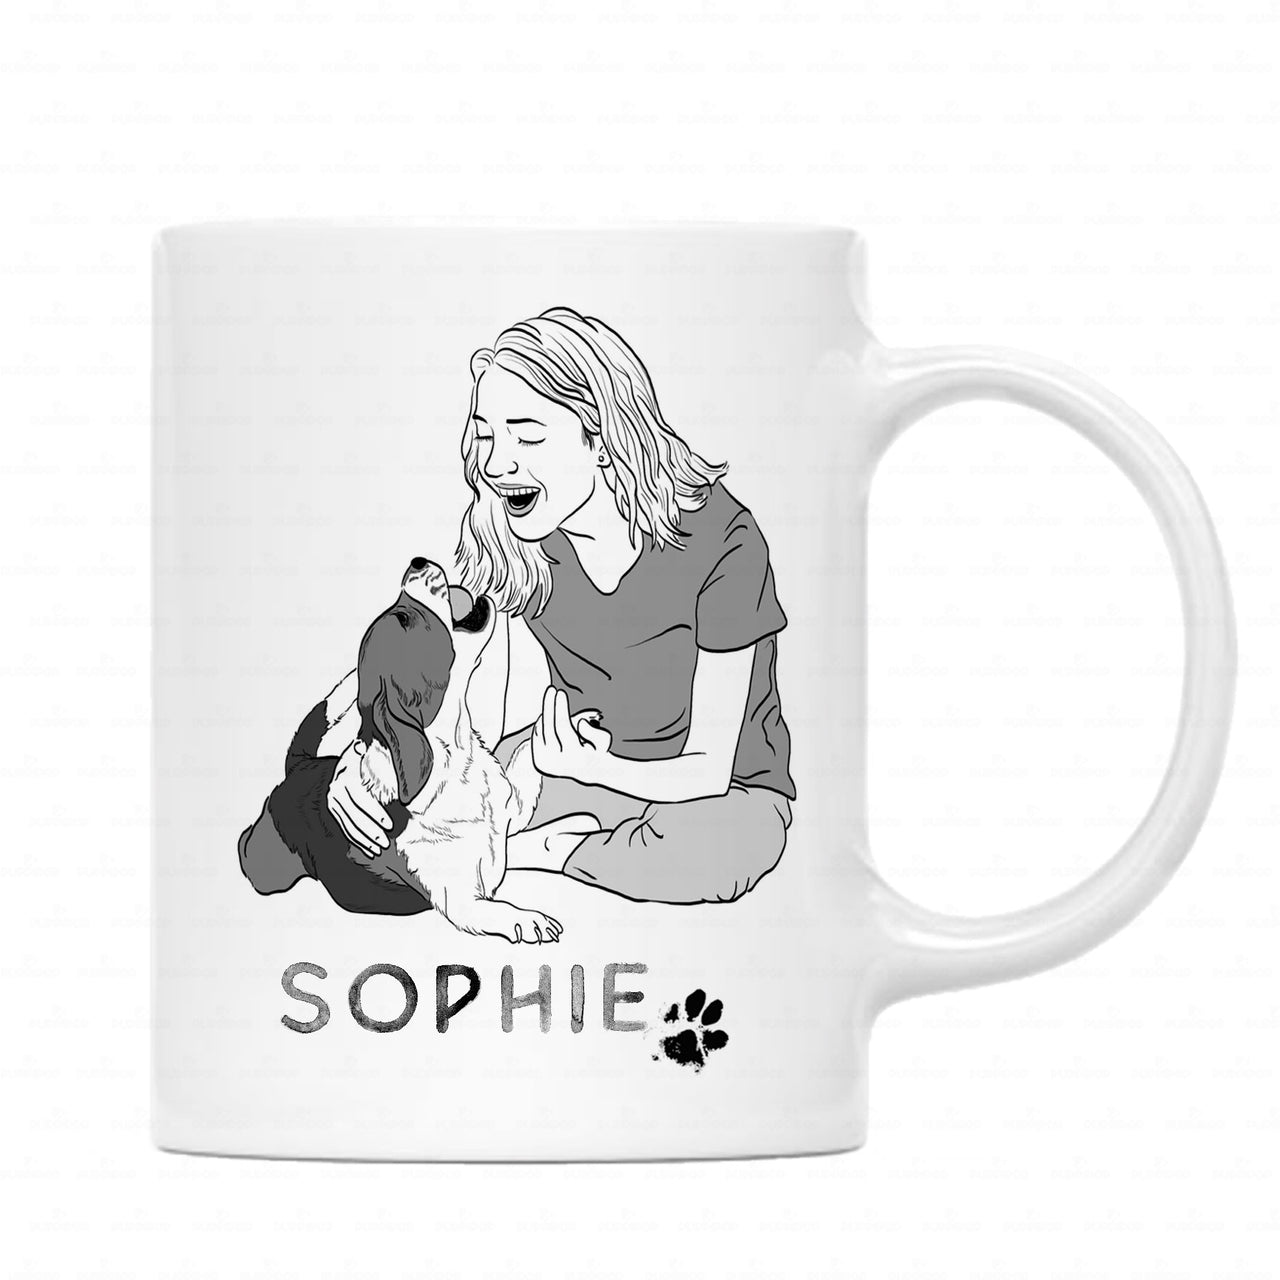 Personalized Gift Bundle - Portrait Sketching For Puppy Lovers - Premium Happy Ever After